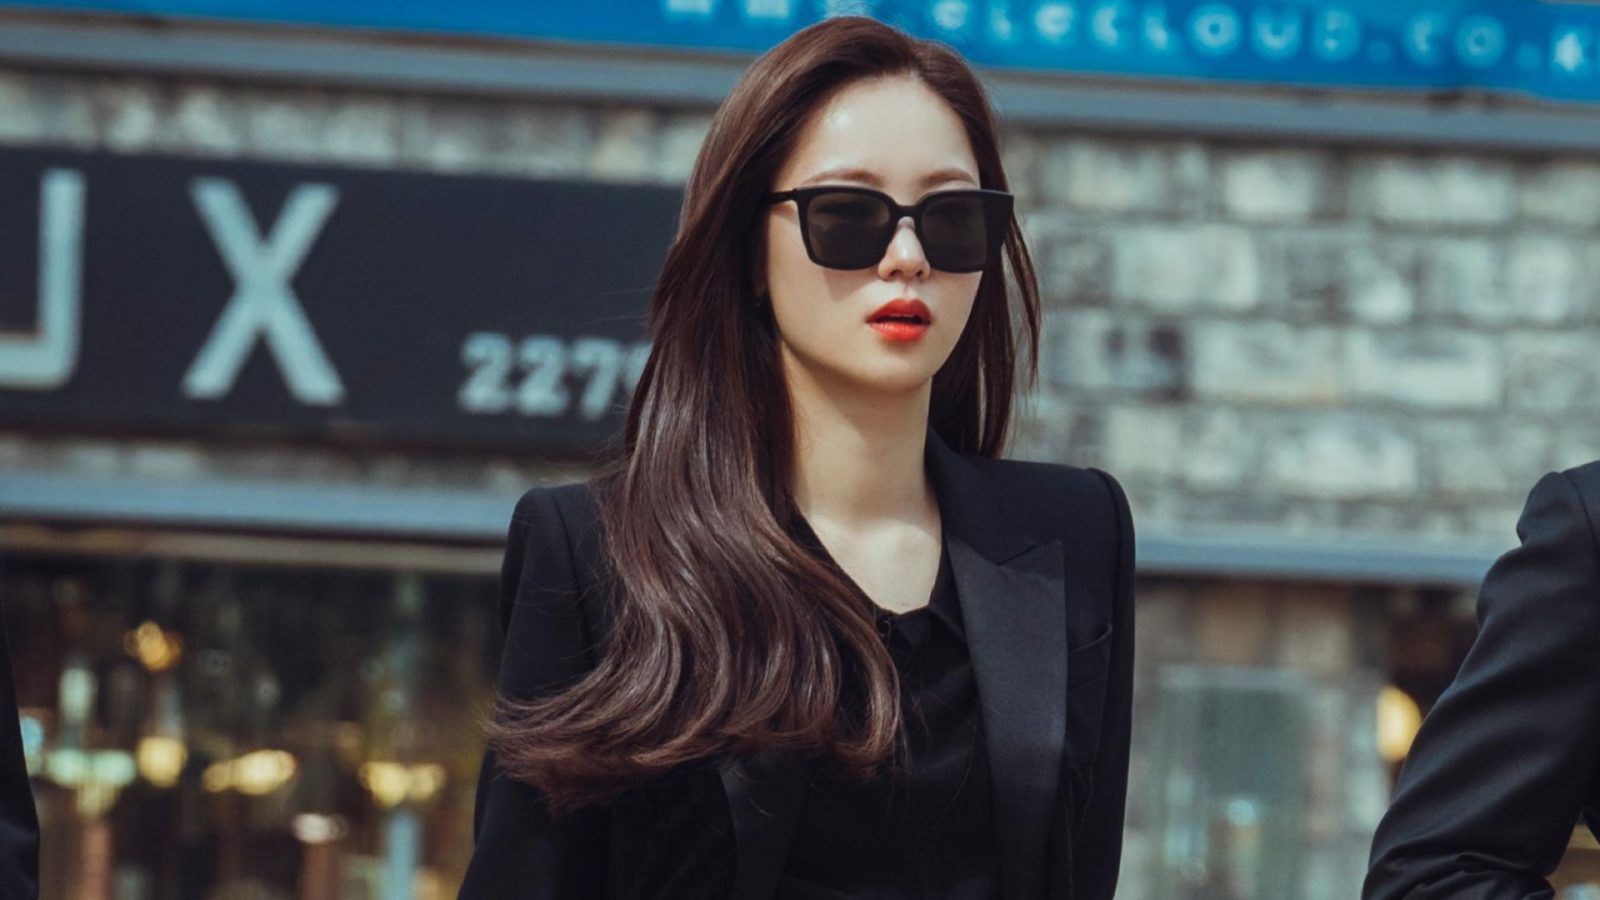 10 stylish K-drama characters that inspire us with their high fashion looks